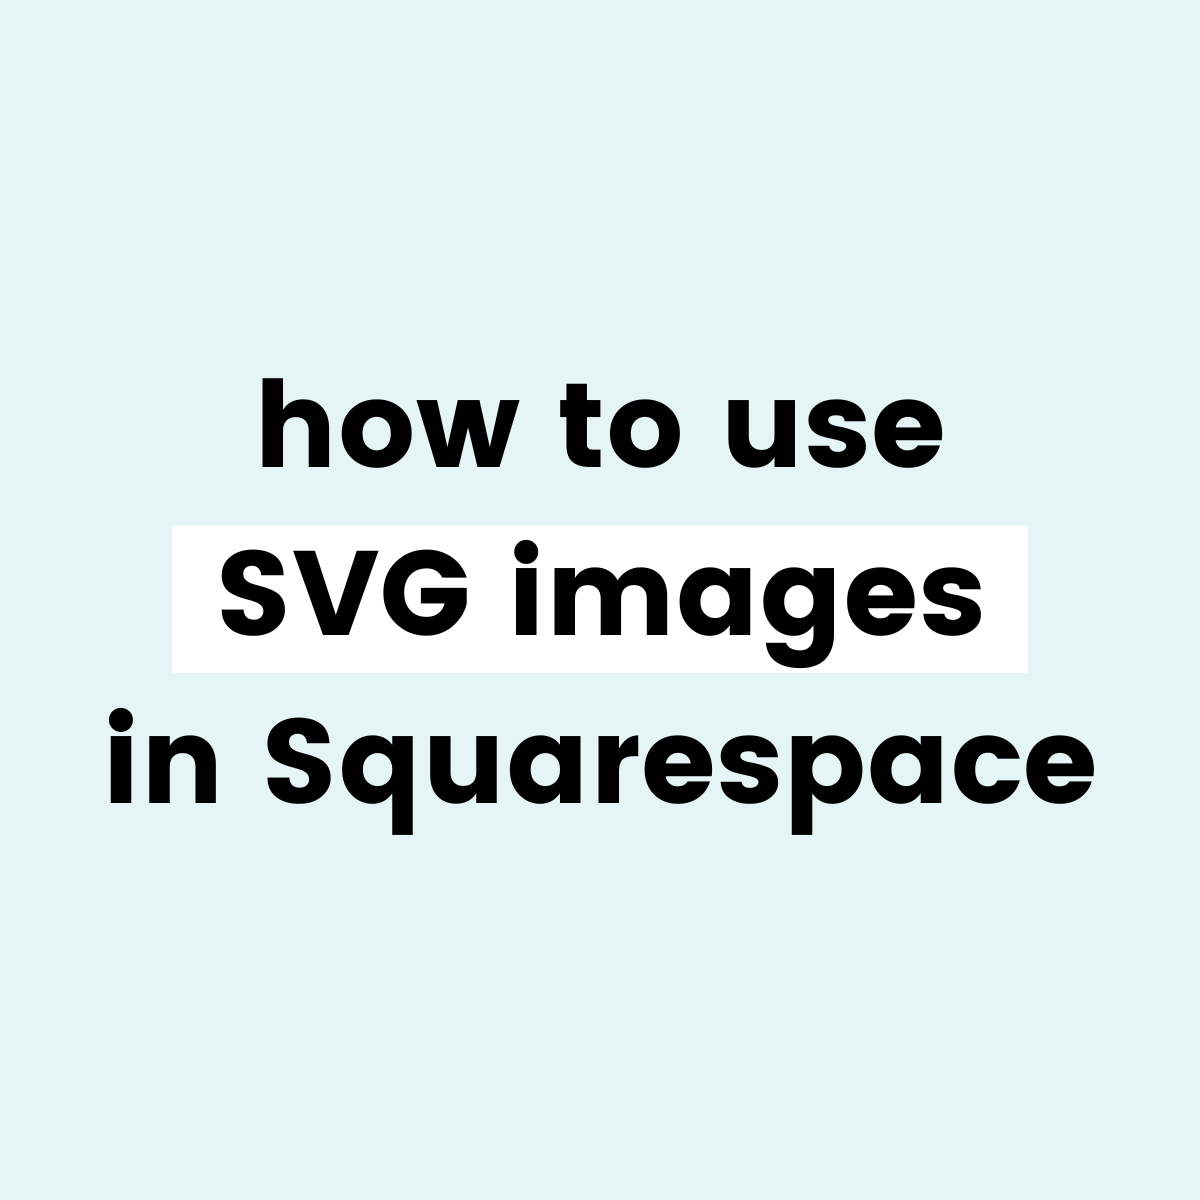 How to Add an SVG Logo to Your Squarespace Website